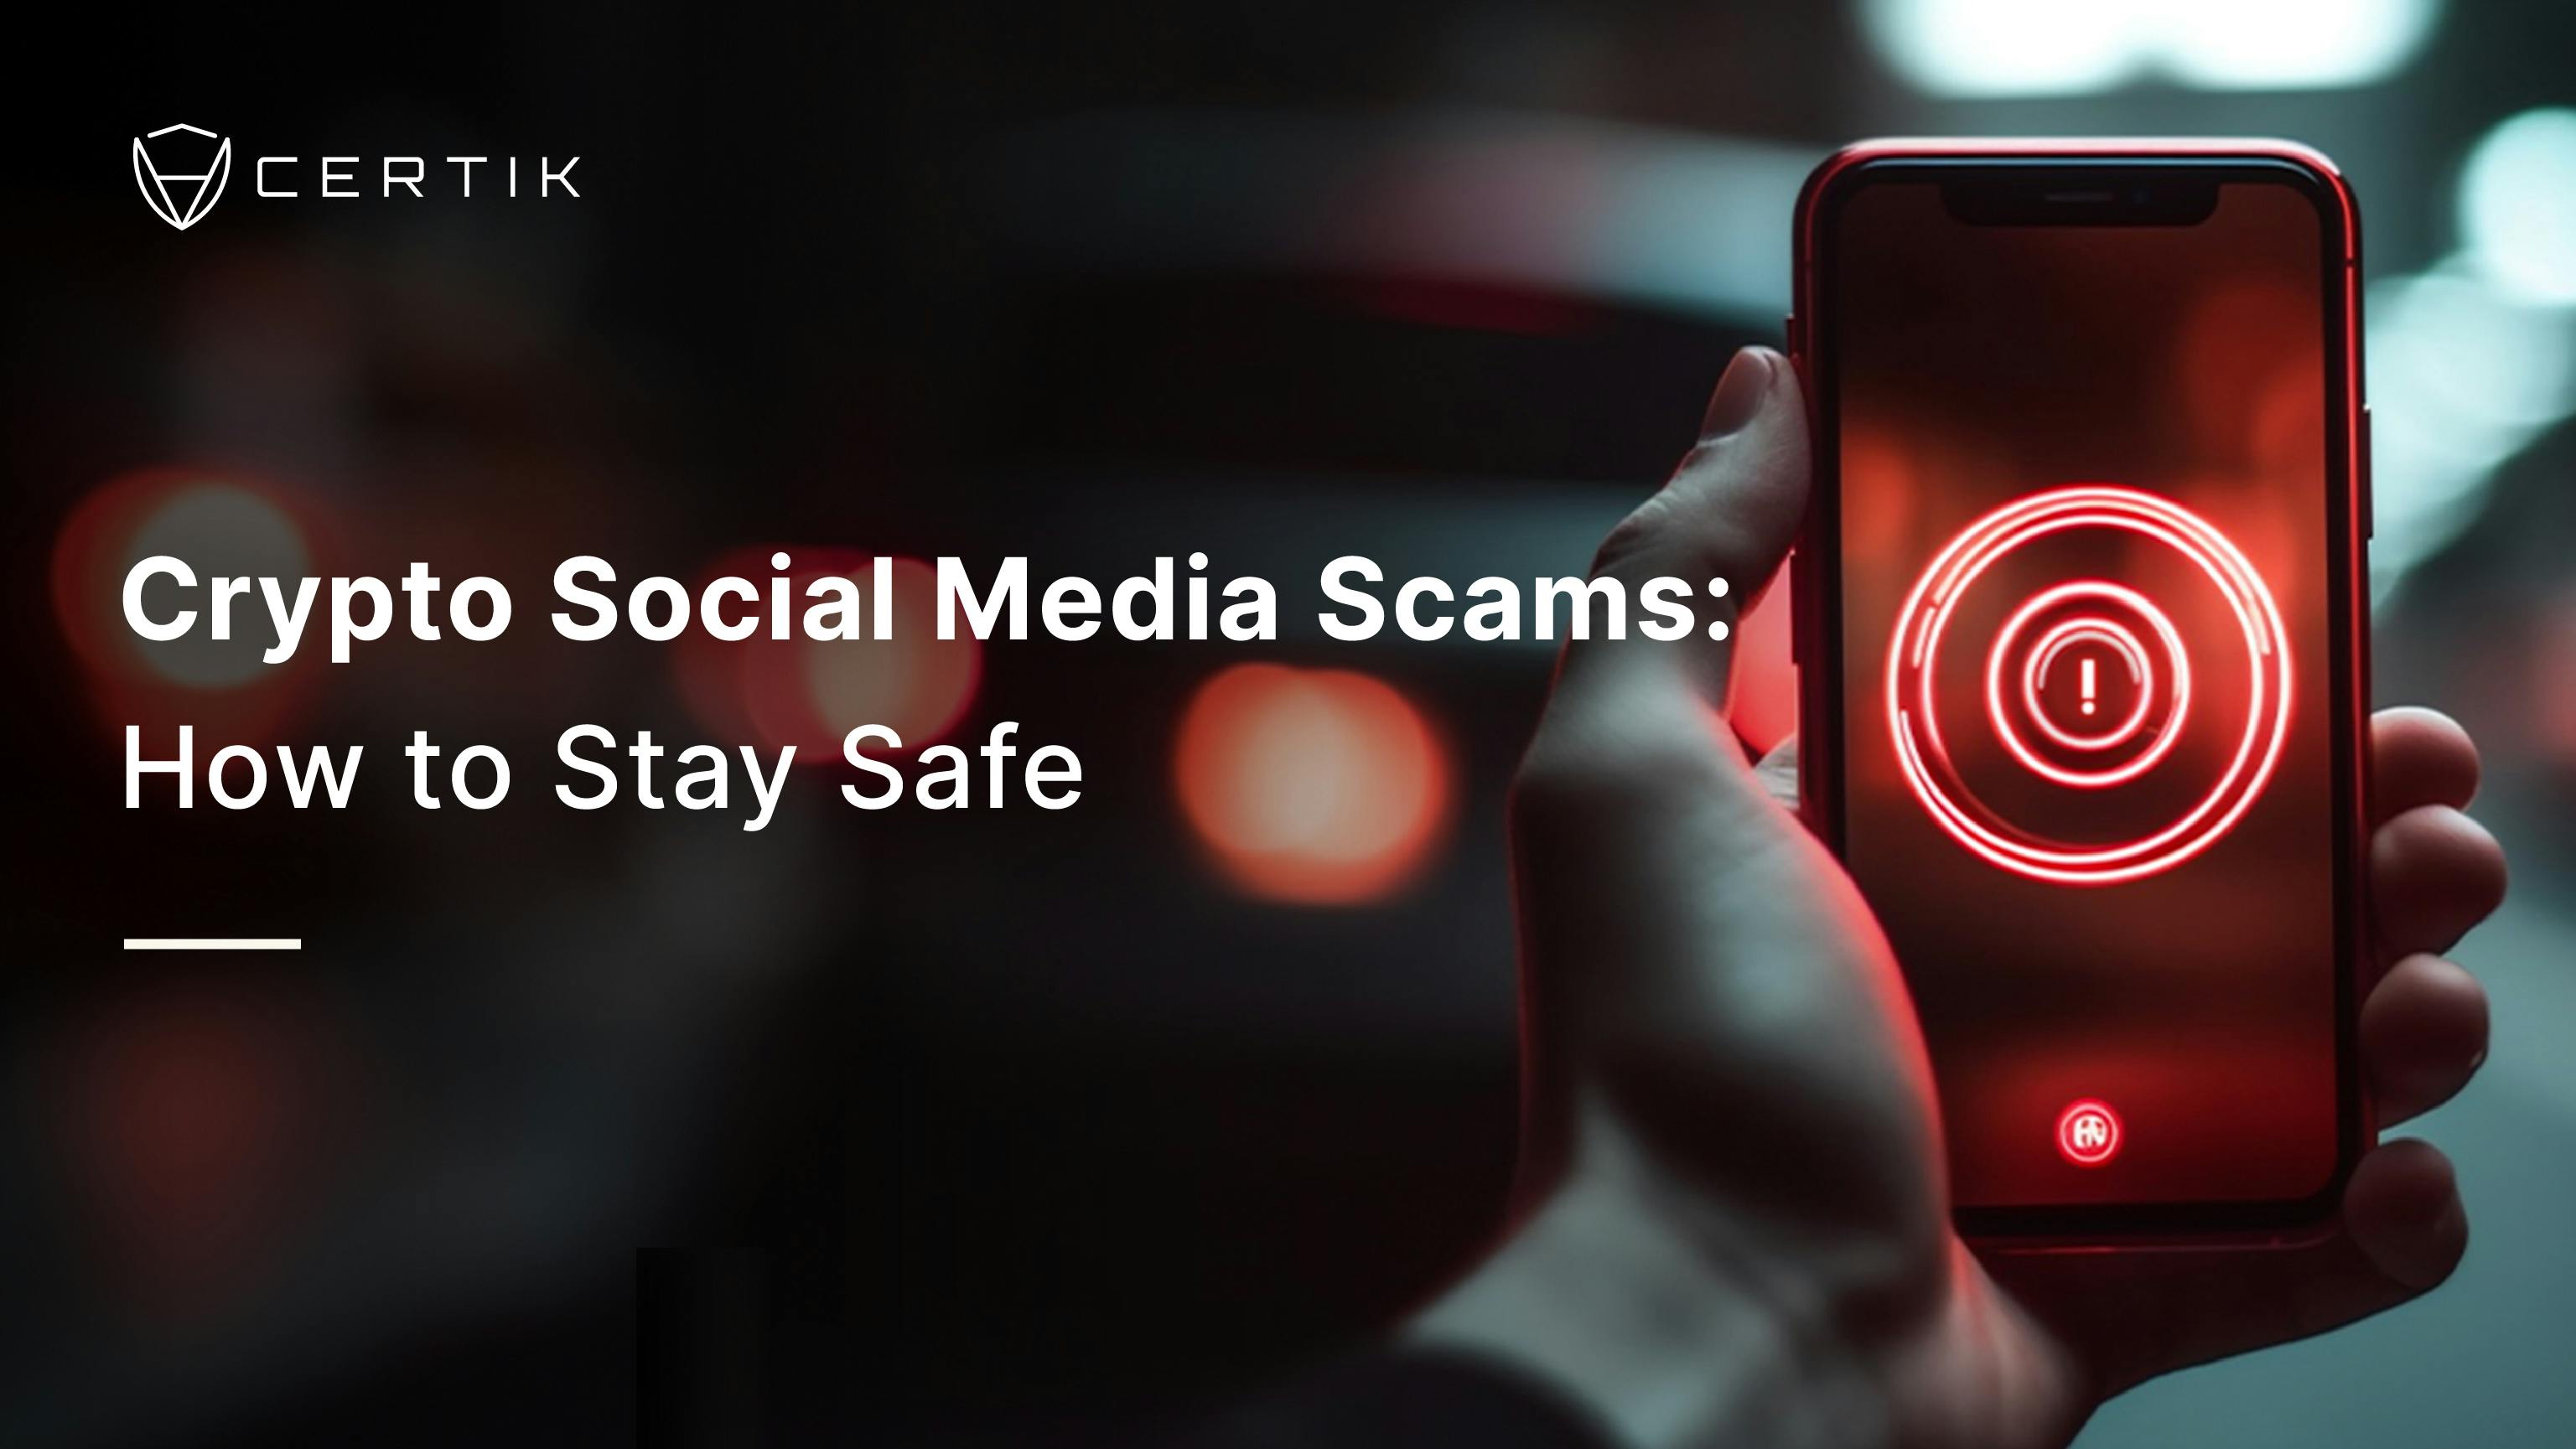 Crypto Social Media Scams: How to Stay Safe